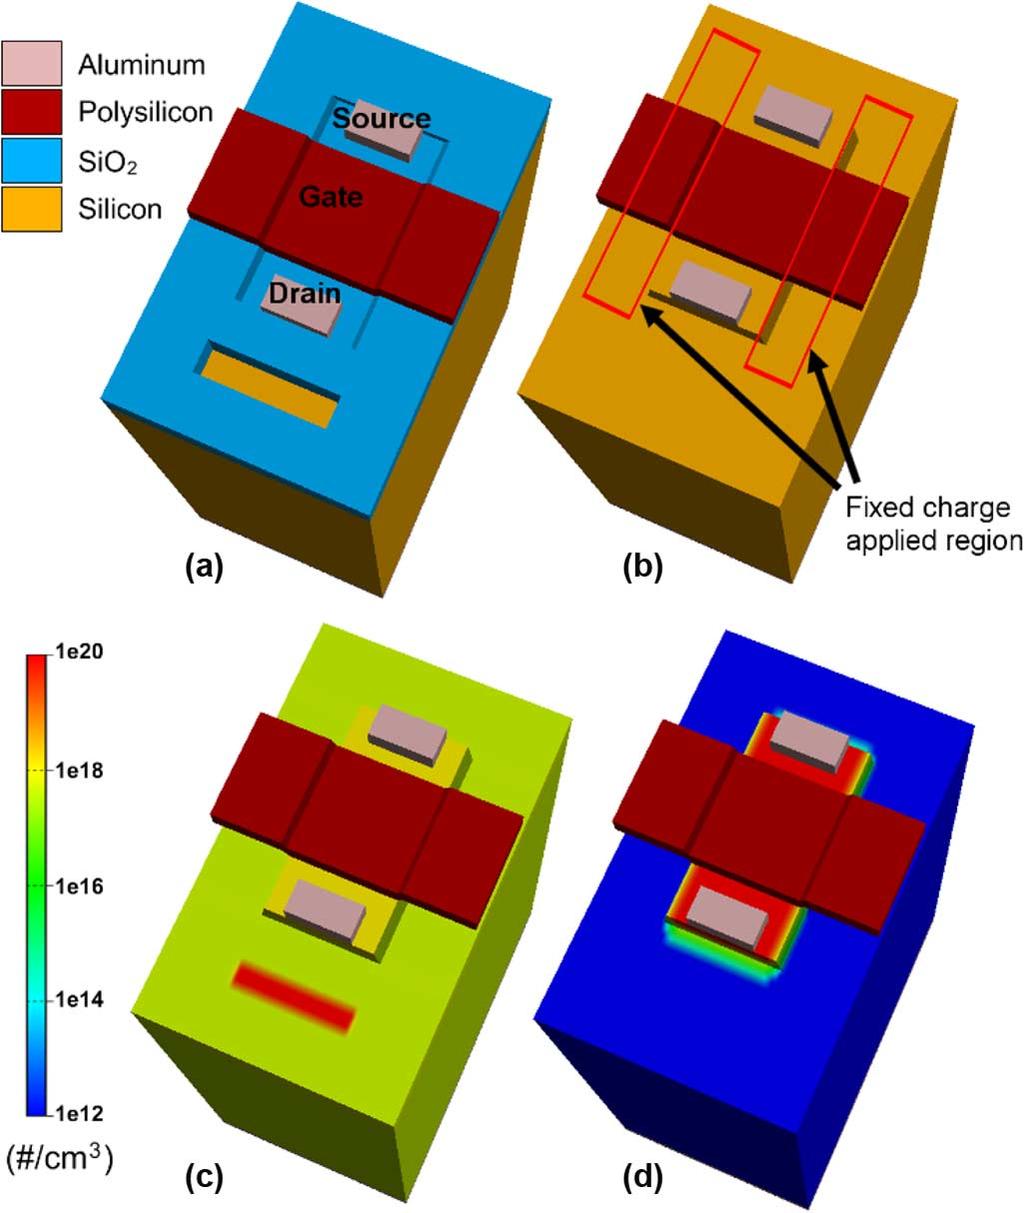 Along with the design guidelines used in this study, a comparison of the total areas occupied by the conventional n-mosfet and by the DGA n-mosfet without an additional guard ring structure is also